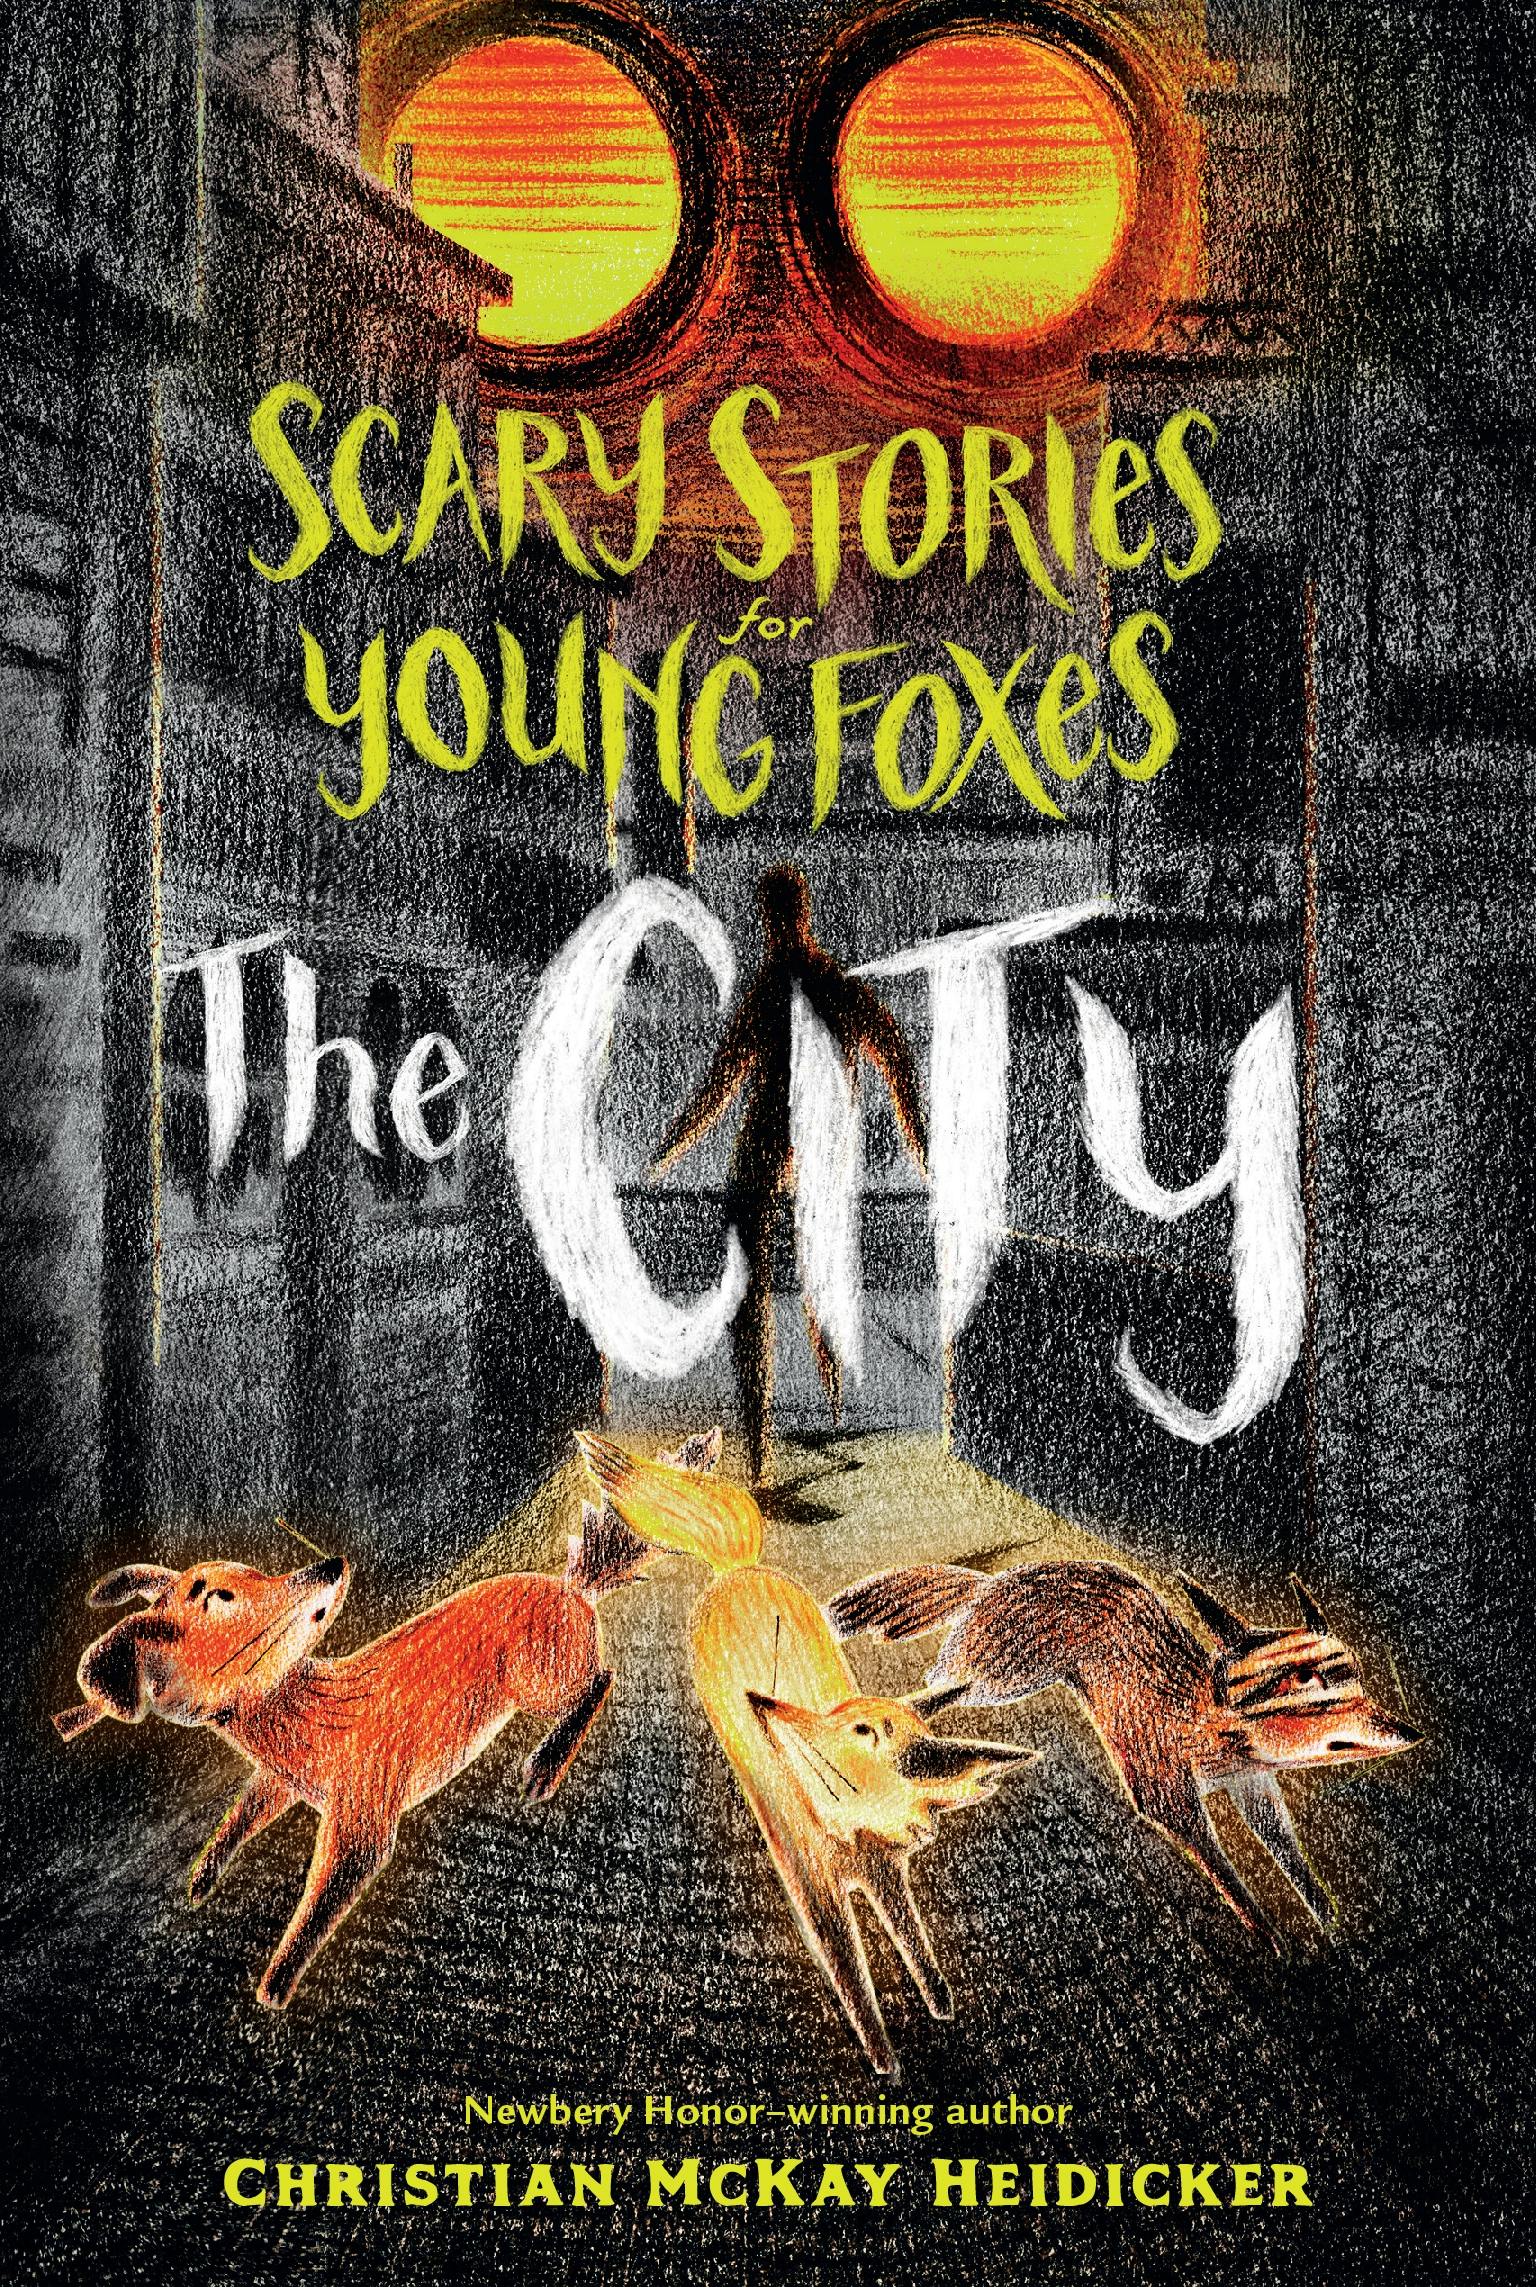 Image of Scary Stories for Young Foxes: The City